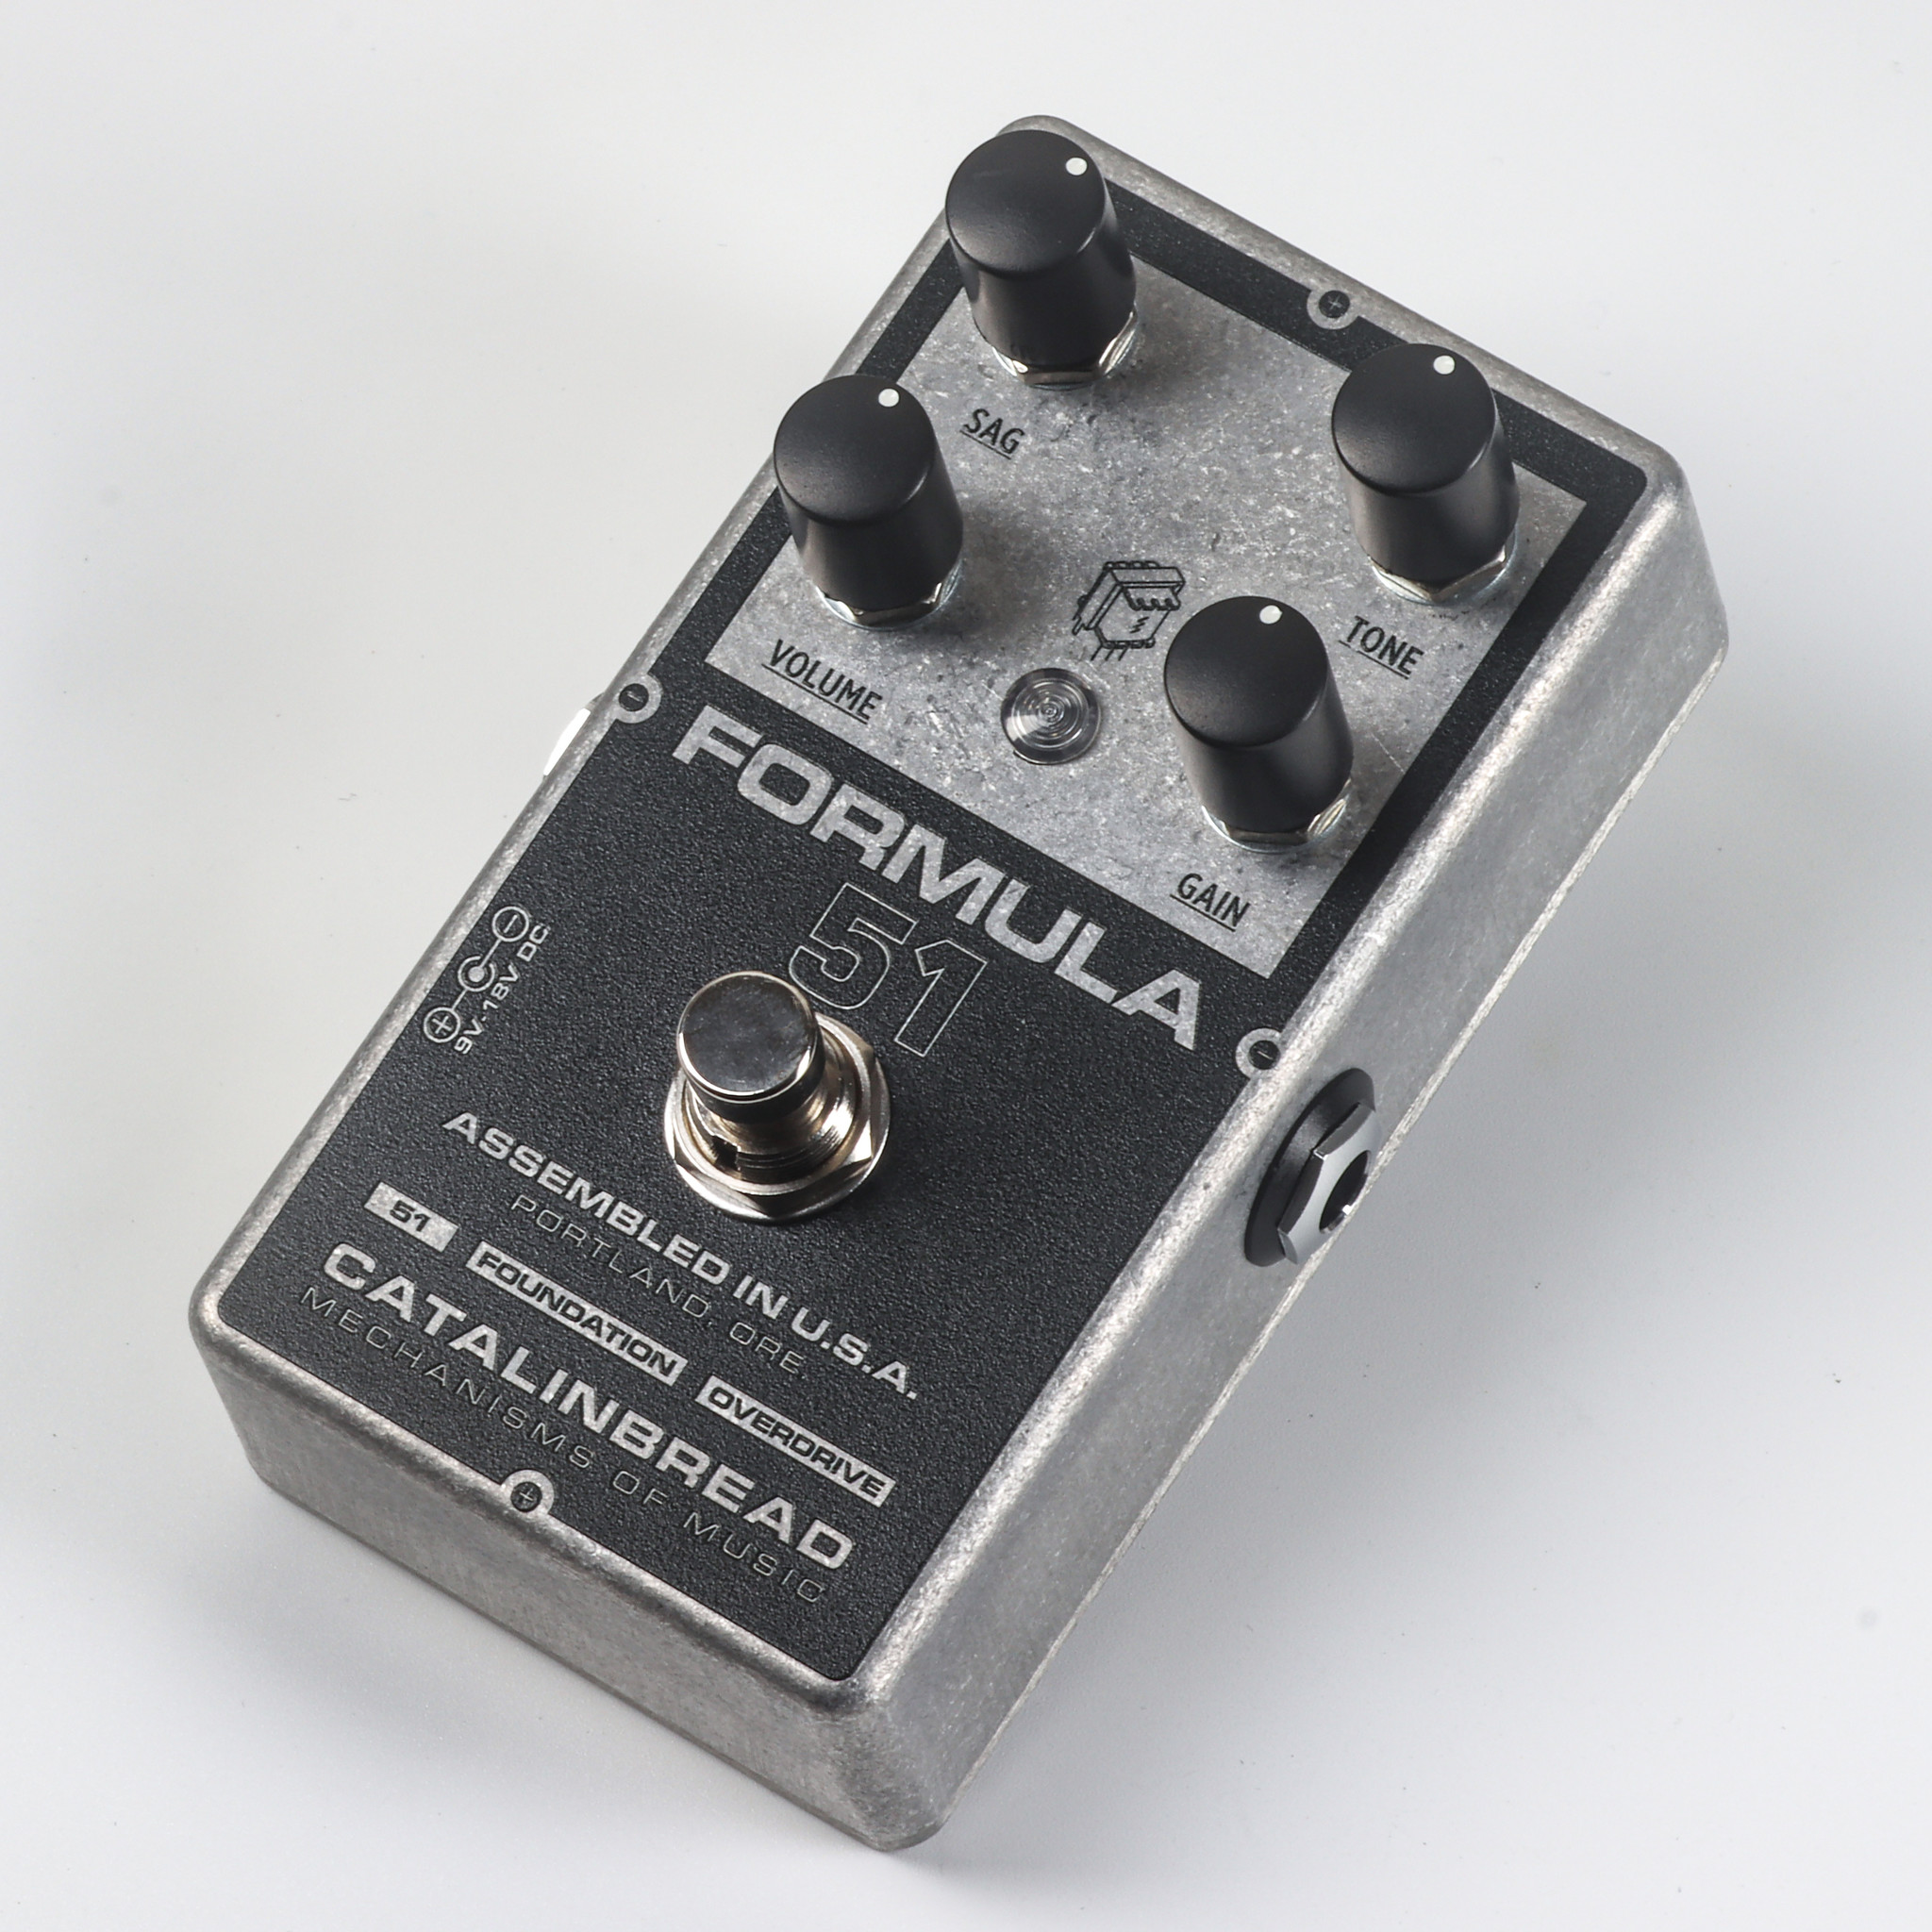 Catalinbread Formula 51 - Foundation Overdrive (Inspired by Fender Tweed Champ)